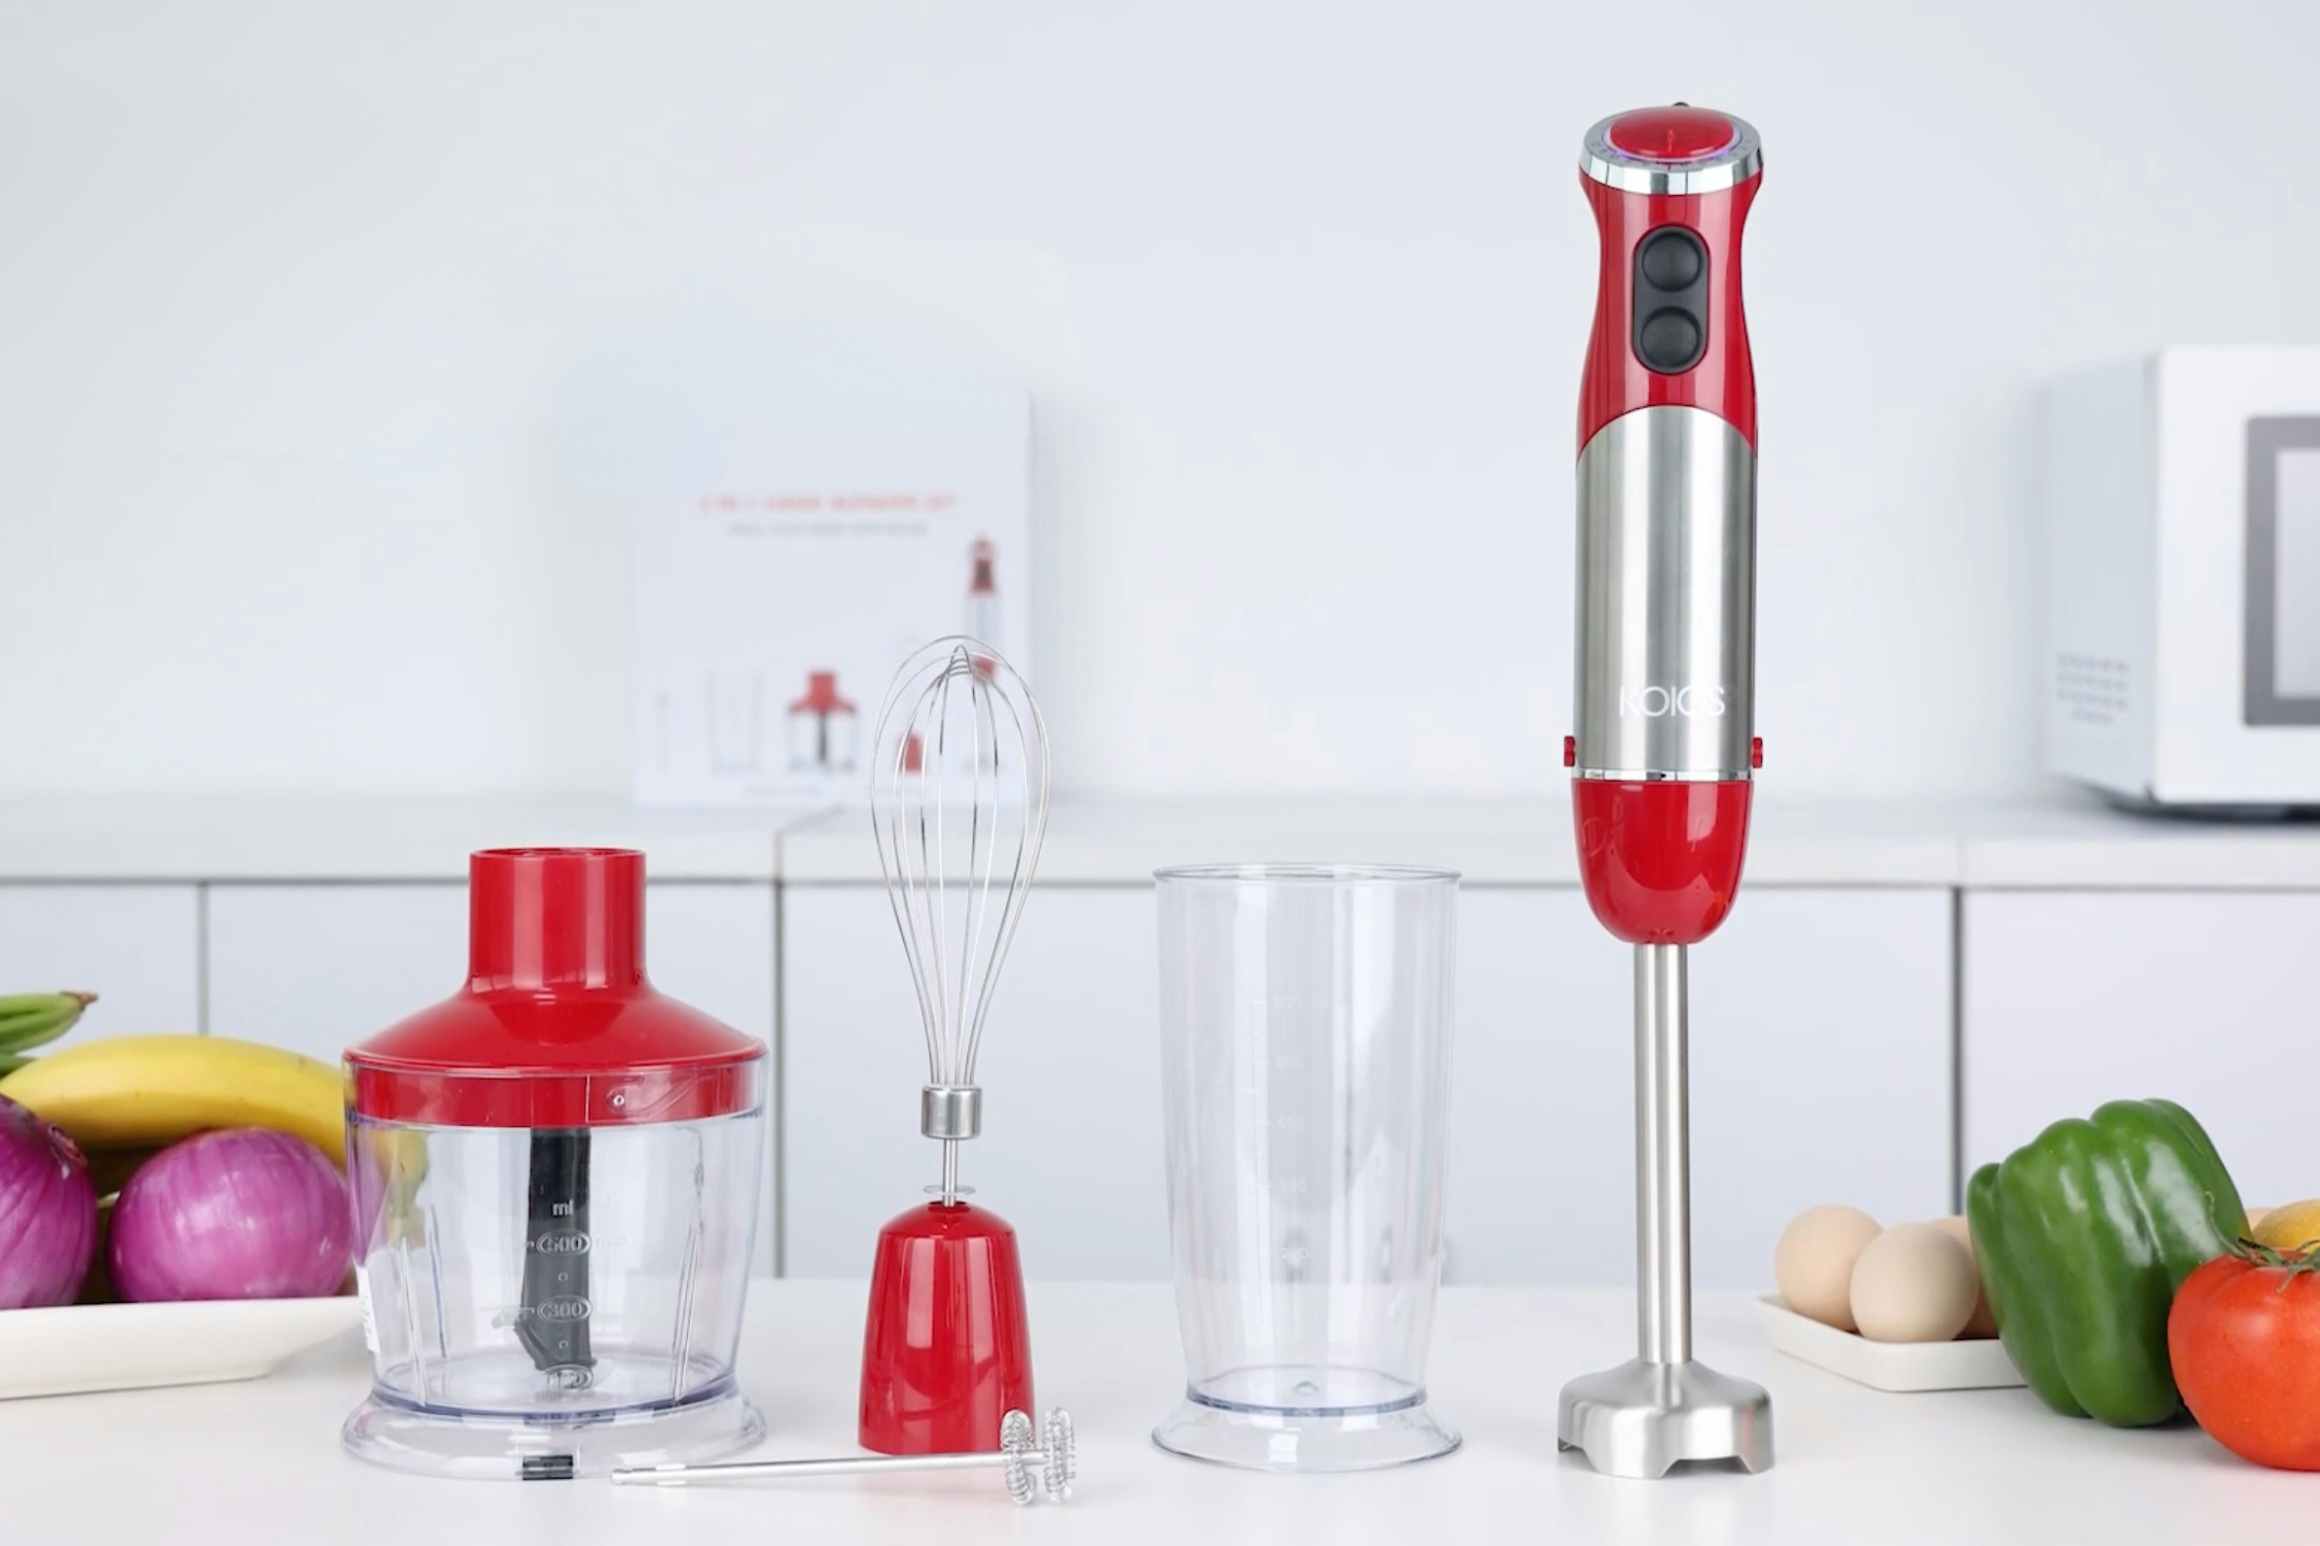 5-in-1 Immersion Hand Blender, Now $29.99 on Amazon